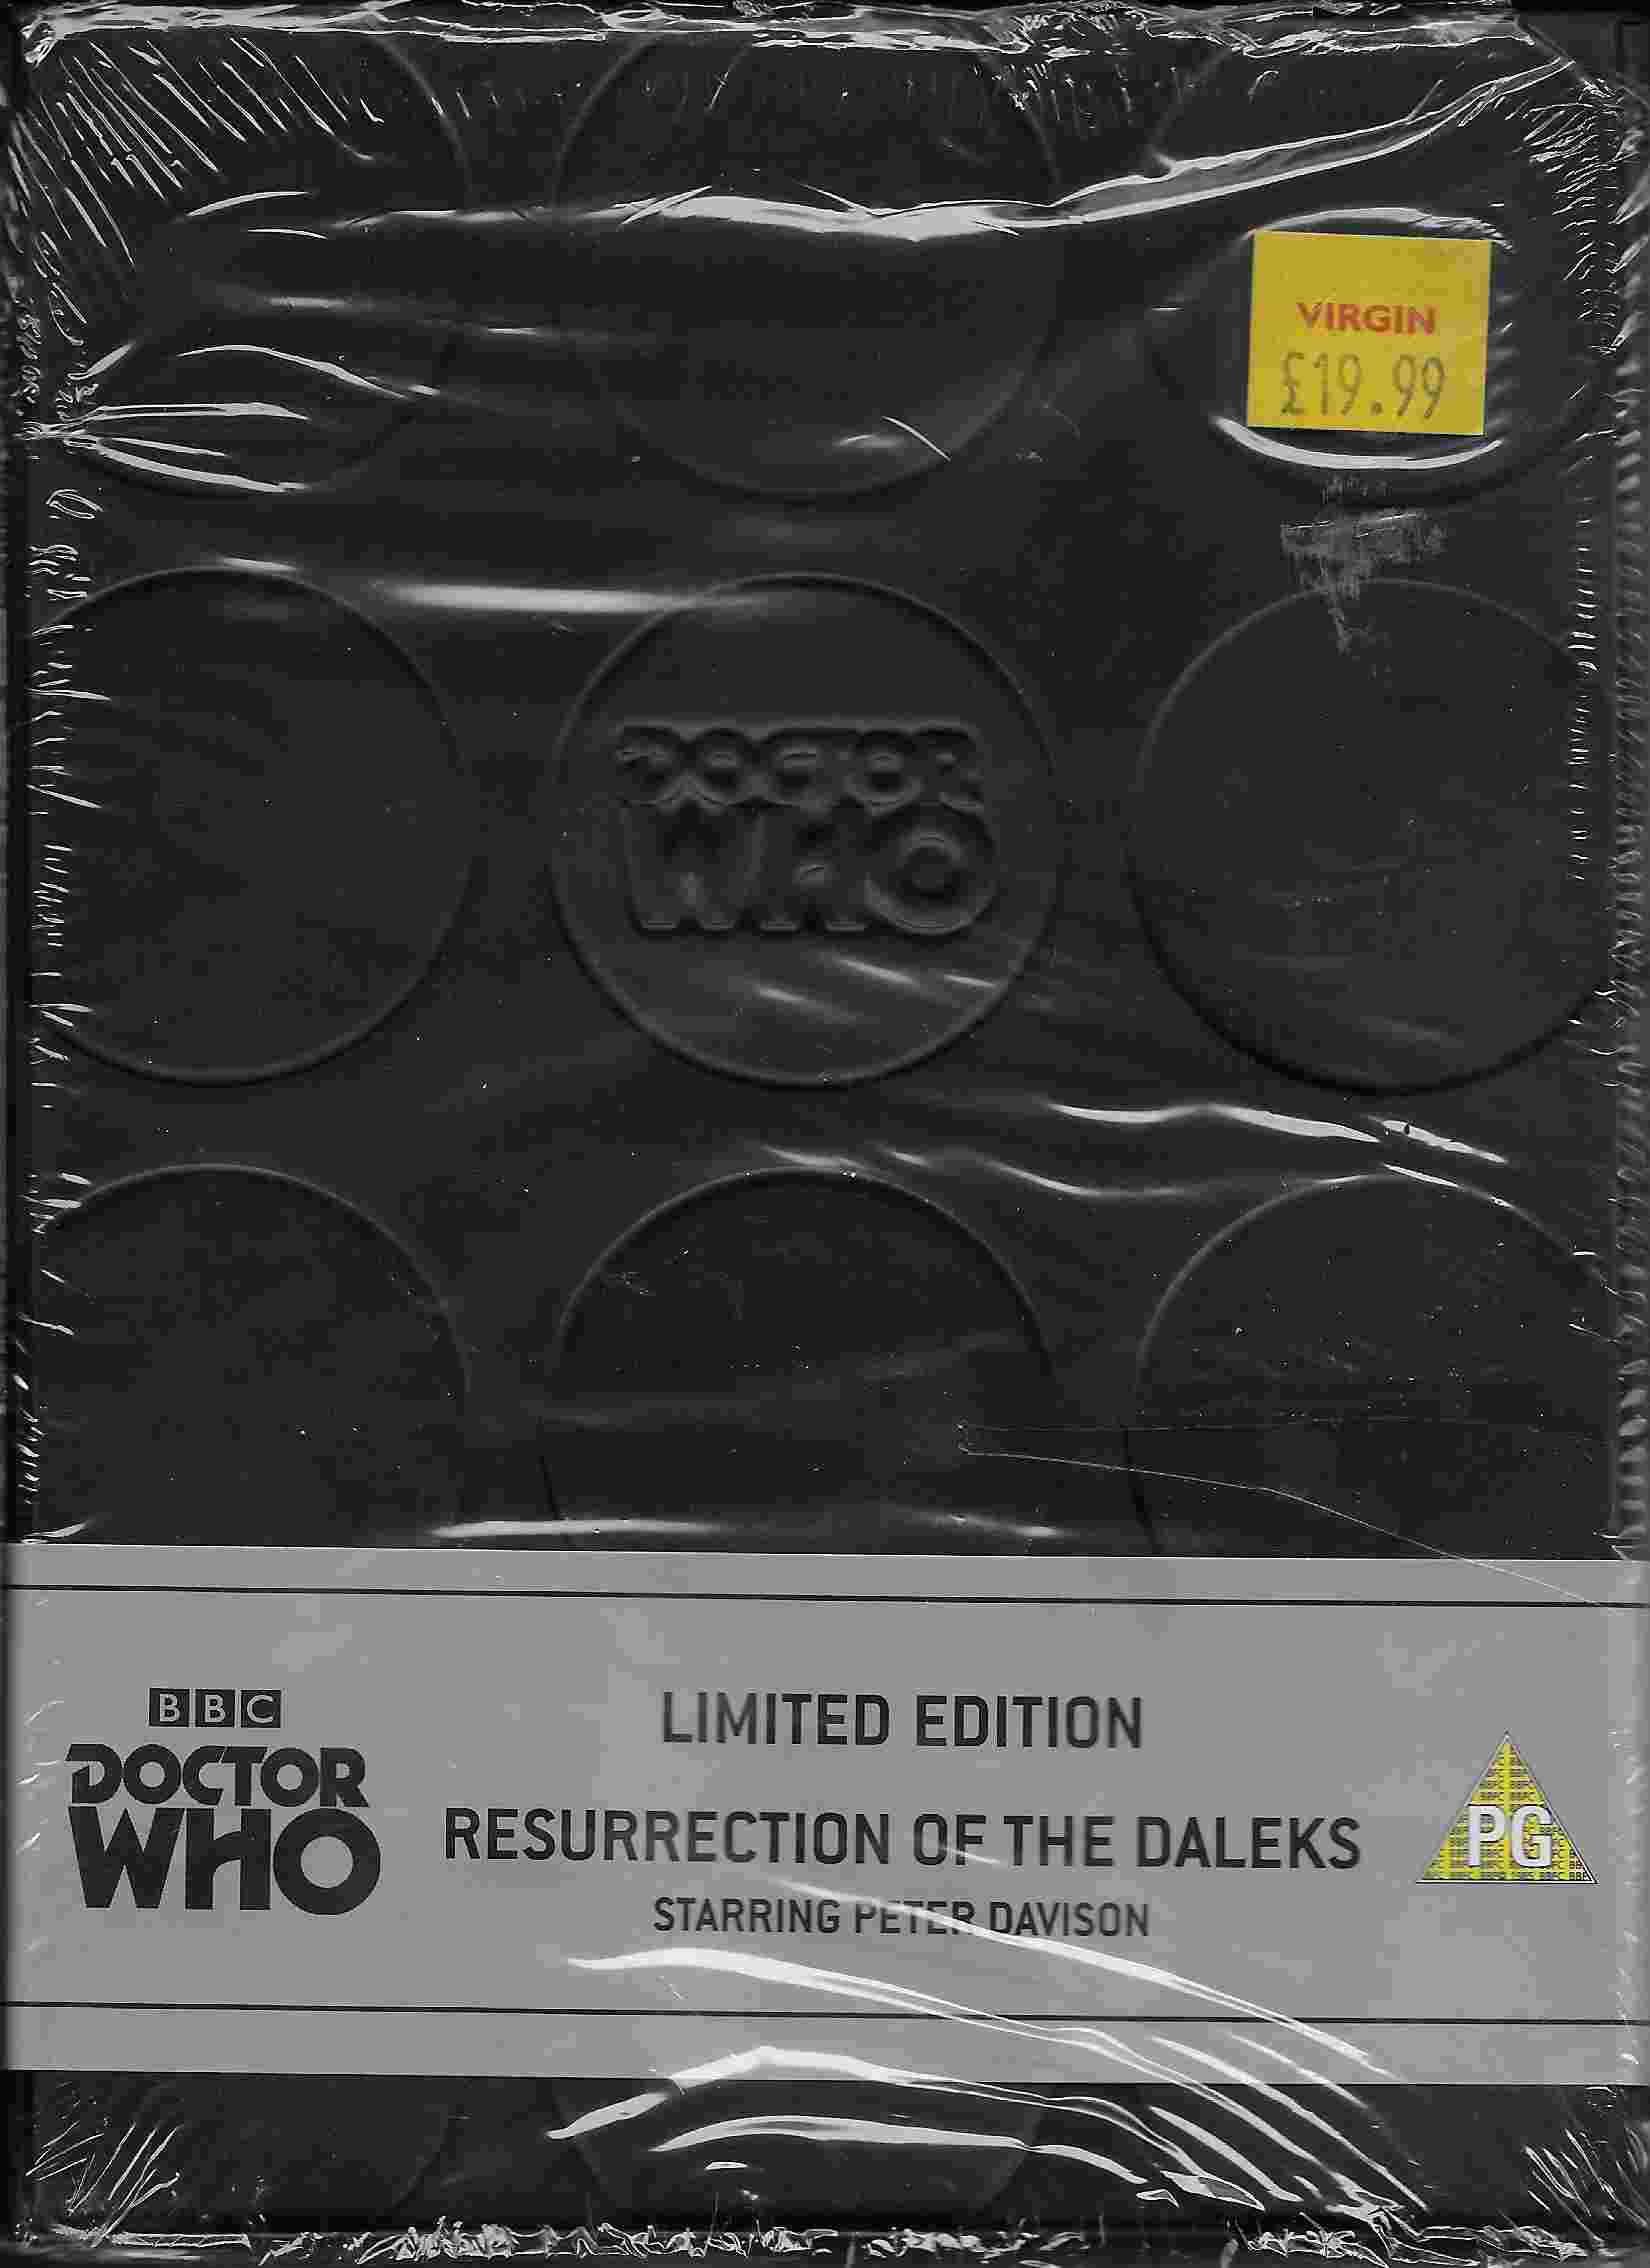 Picture of BBCDVD 1100 Doctor Who - Resurrection of the Daleks by artist Eric Saward from the BBC dvds - Records and Tapes library